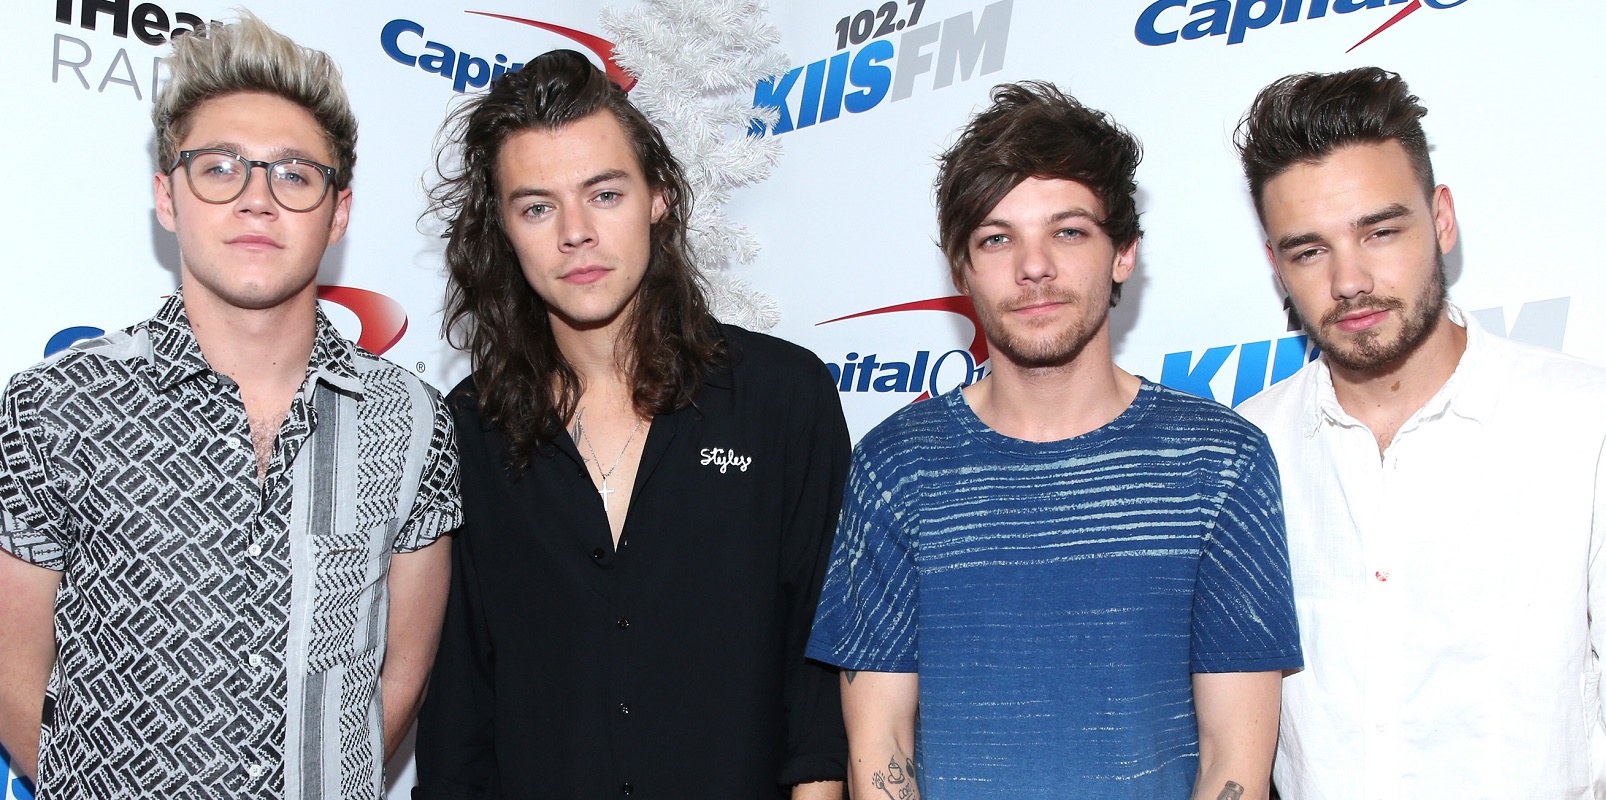 Did One Direction's Louis Tomlinson and Harry Styles have sex